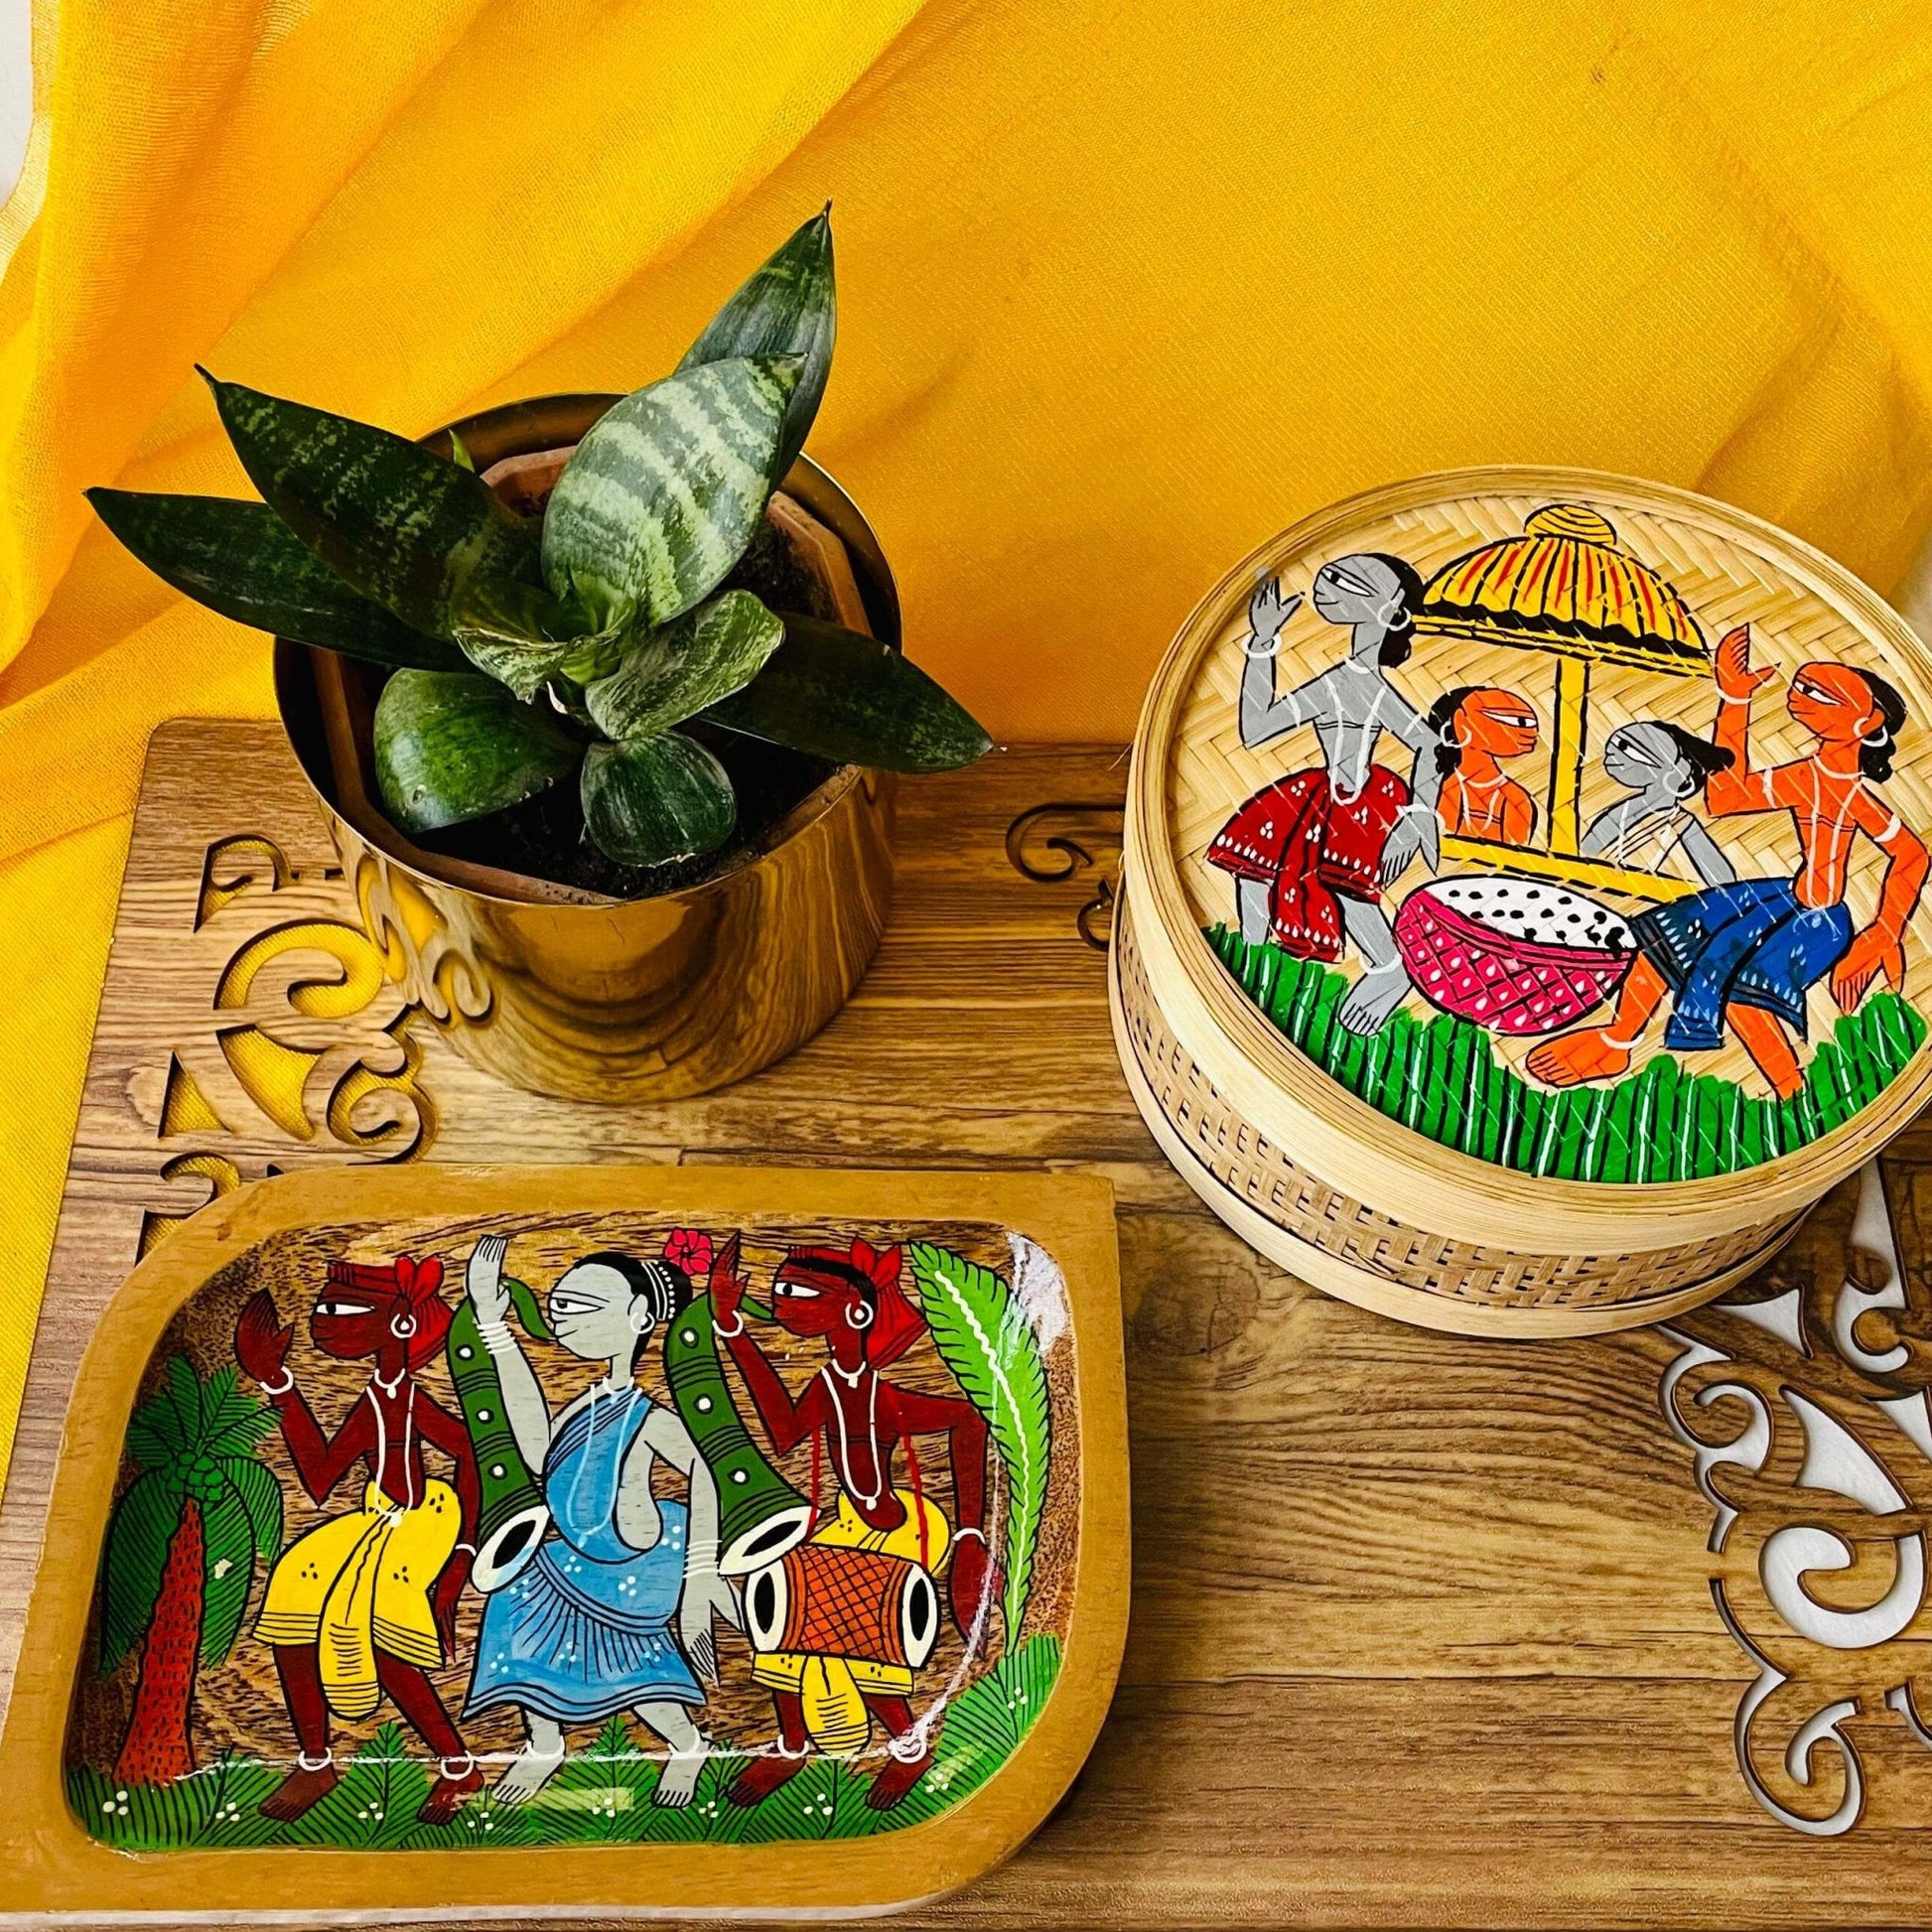 A pure mango wood rectangular wooden platter and a hand-woven bamboo utility or fruit box hand-painted with tribal characters are placed on a brown wood board near a plant pot.